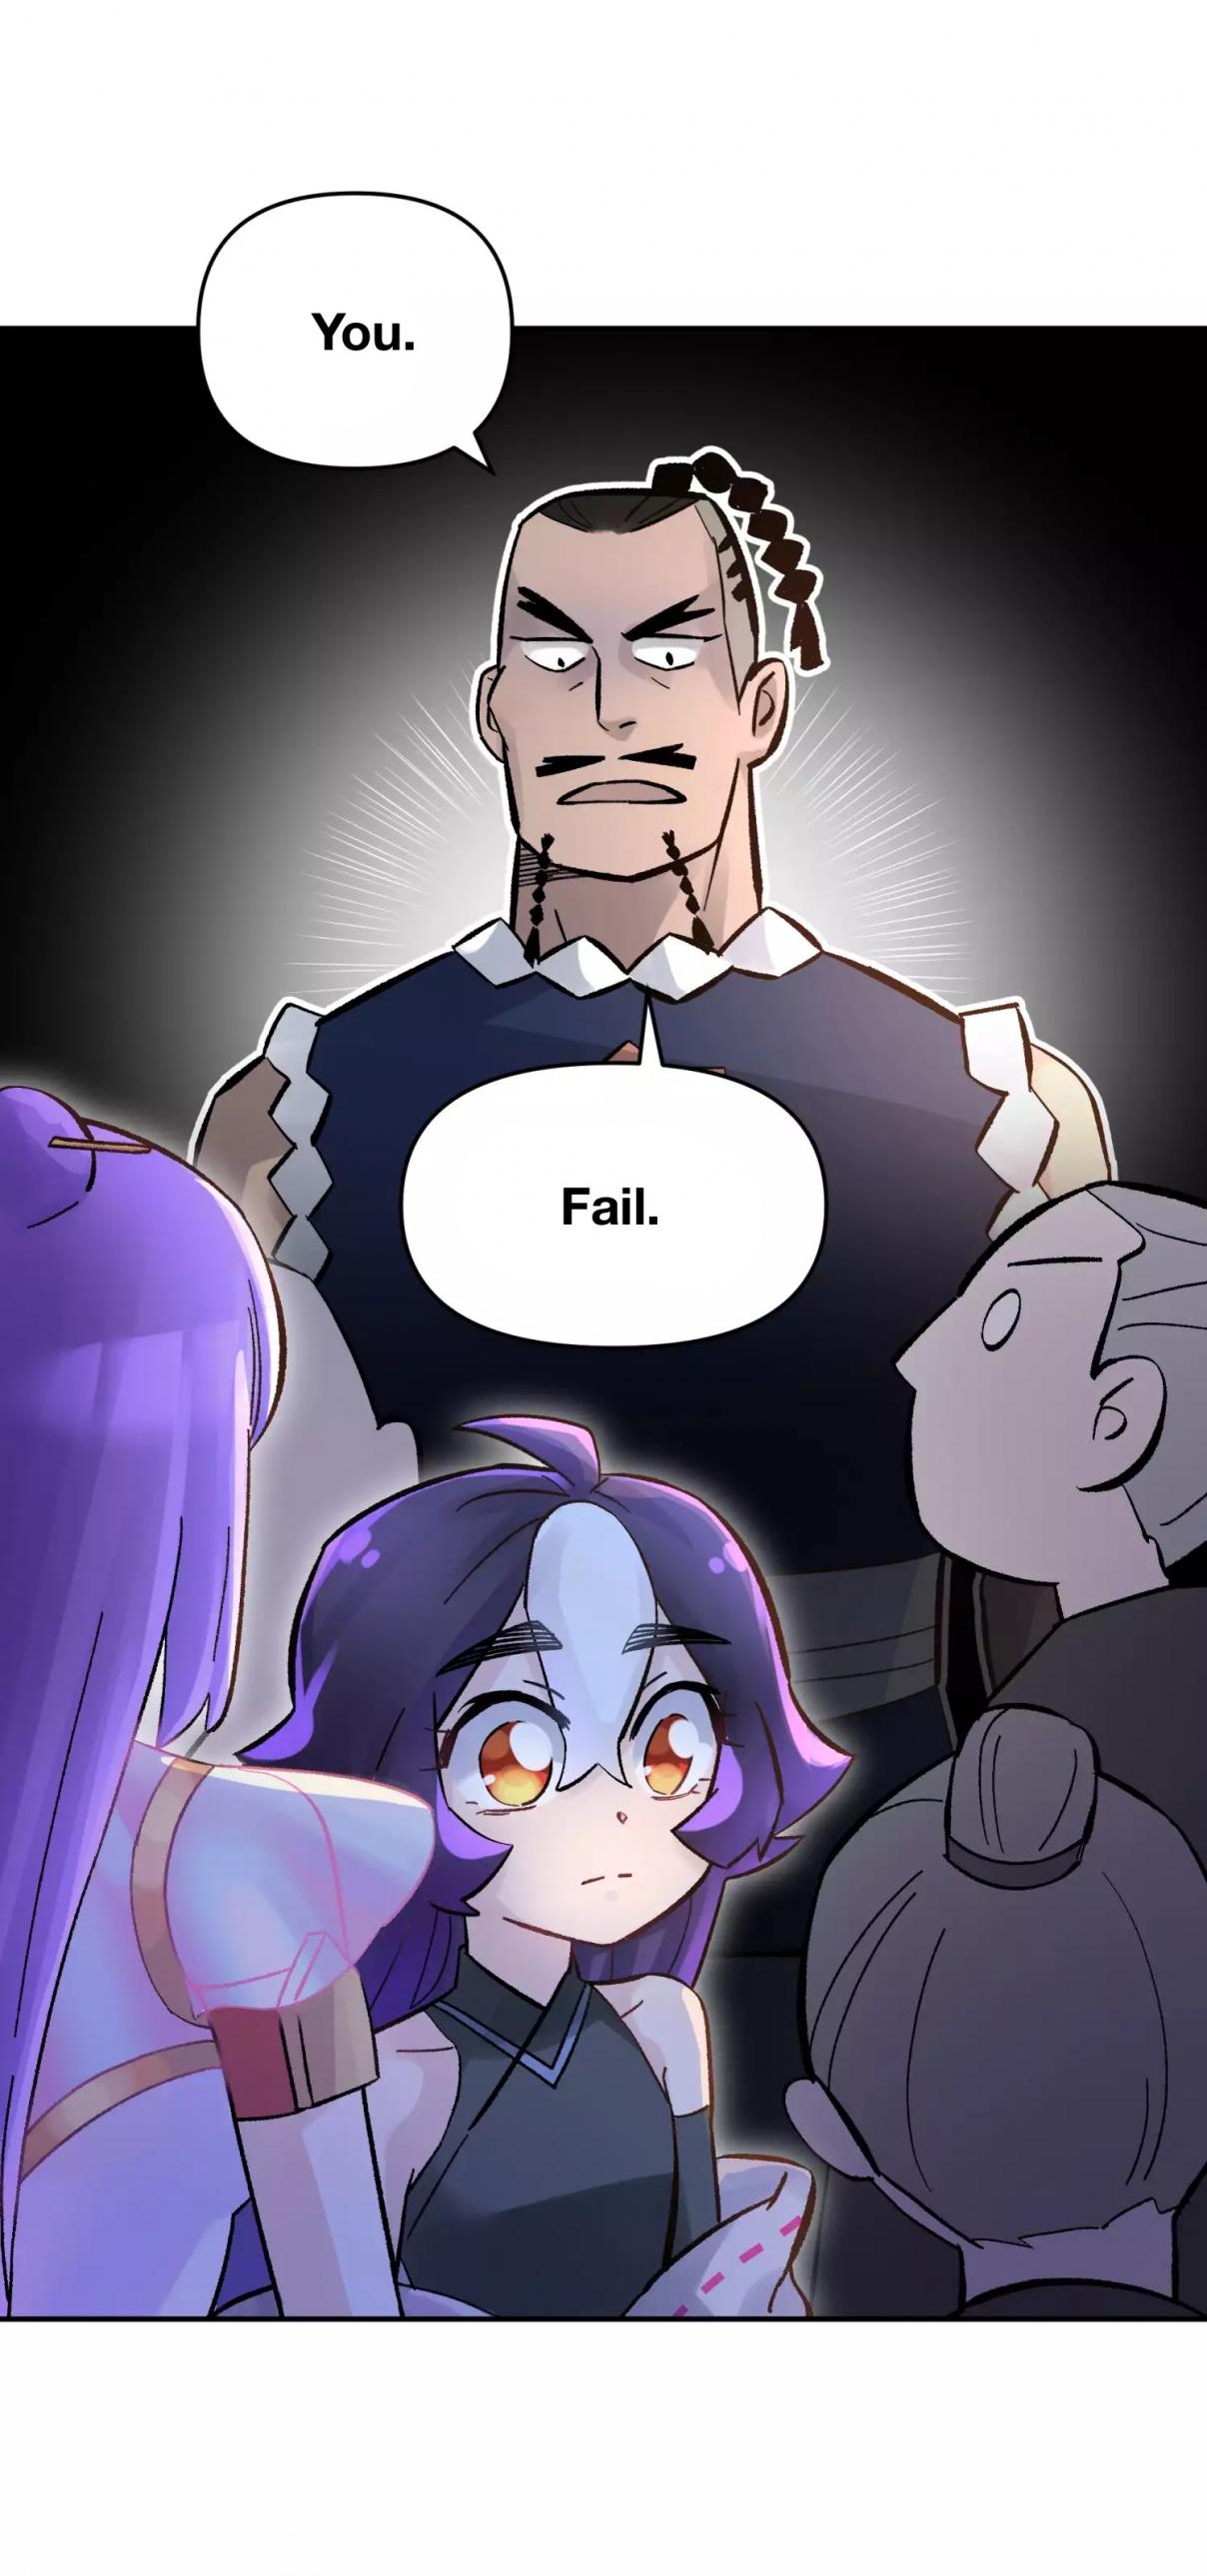 Busted! Darklord Ch. 6 You're not getting into this school